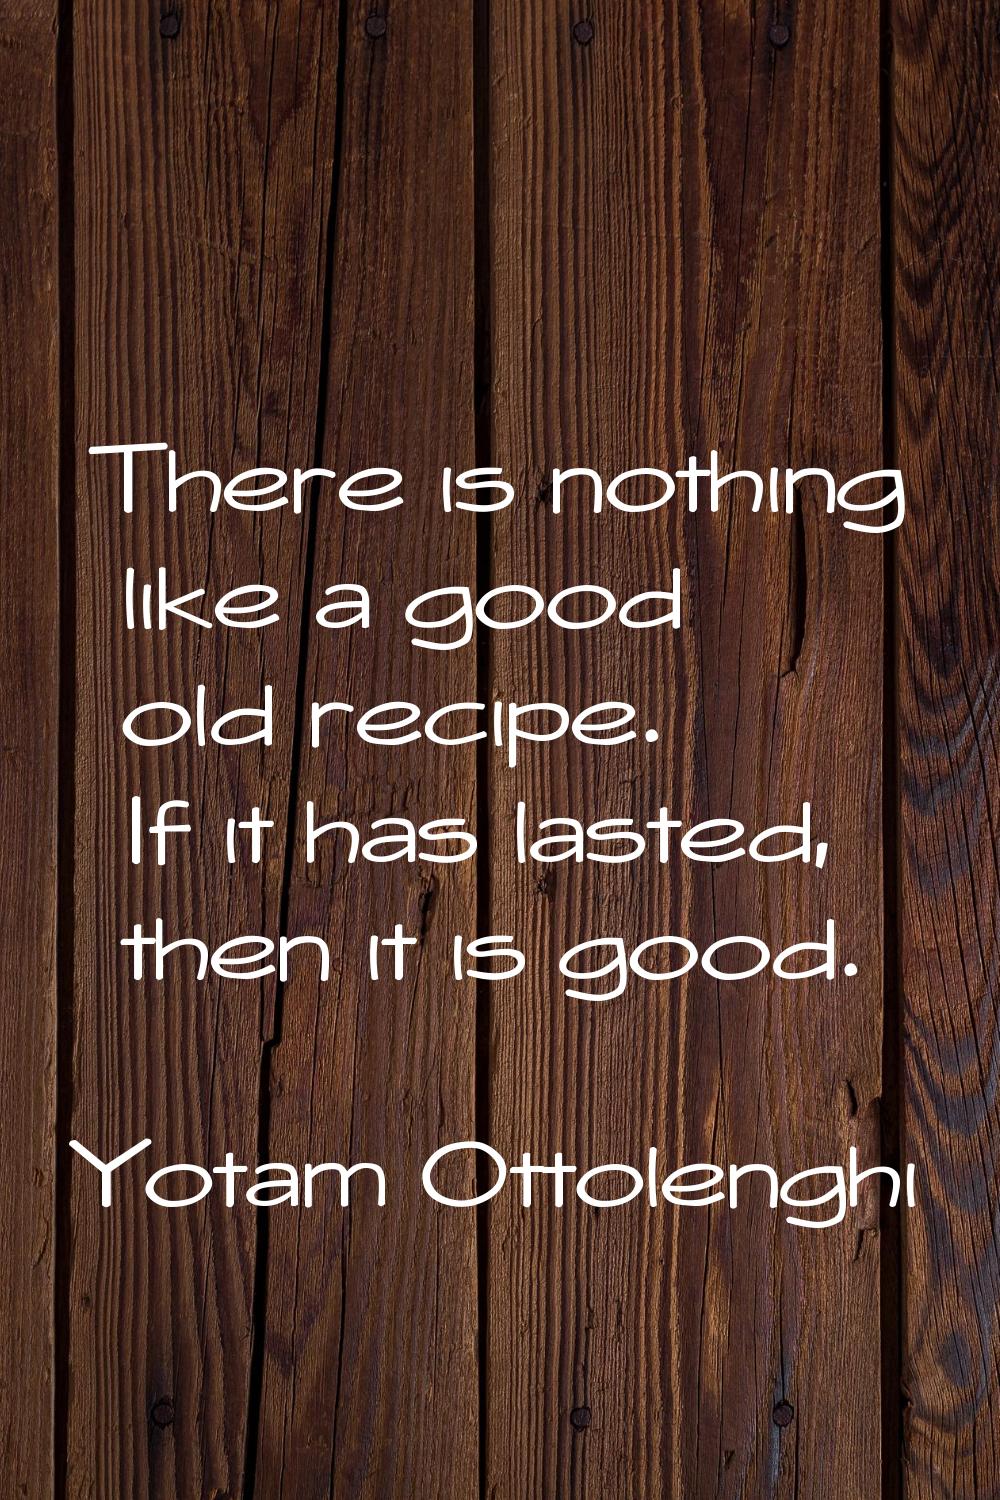 There is nothing like a good old recipe. If it has lasted, then it is good.